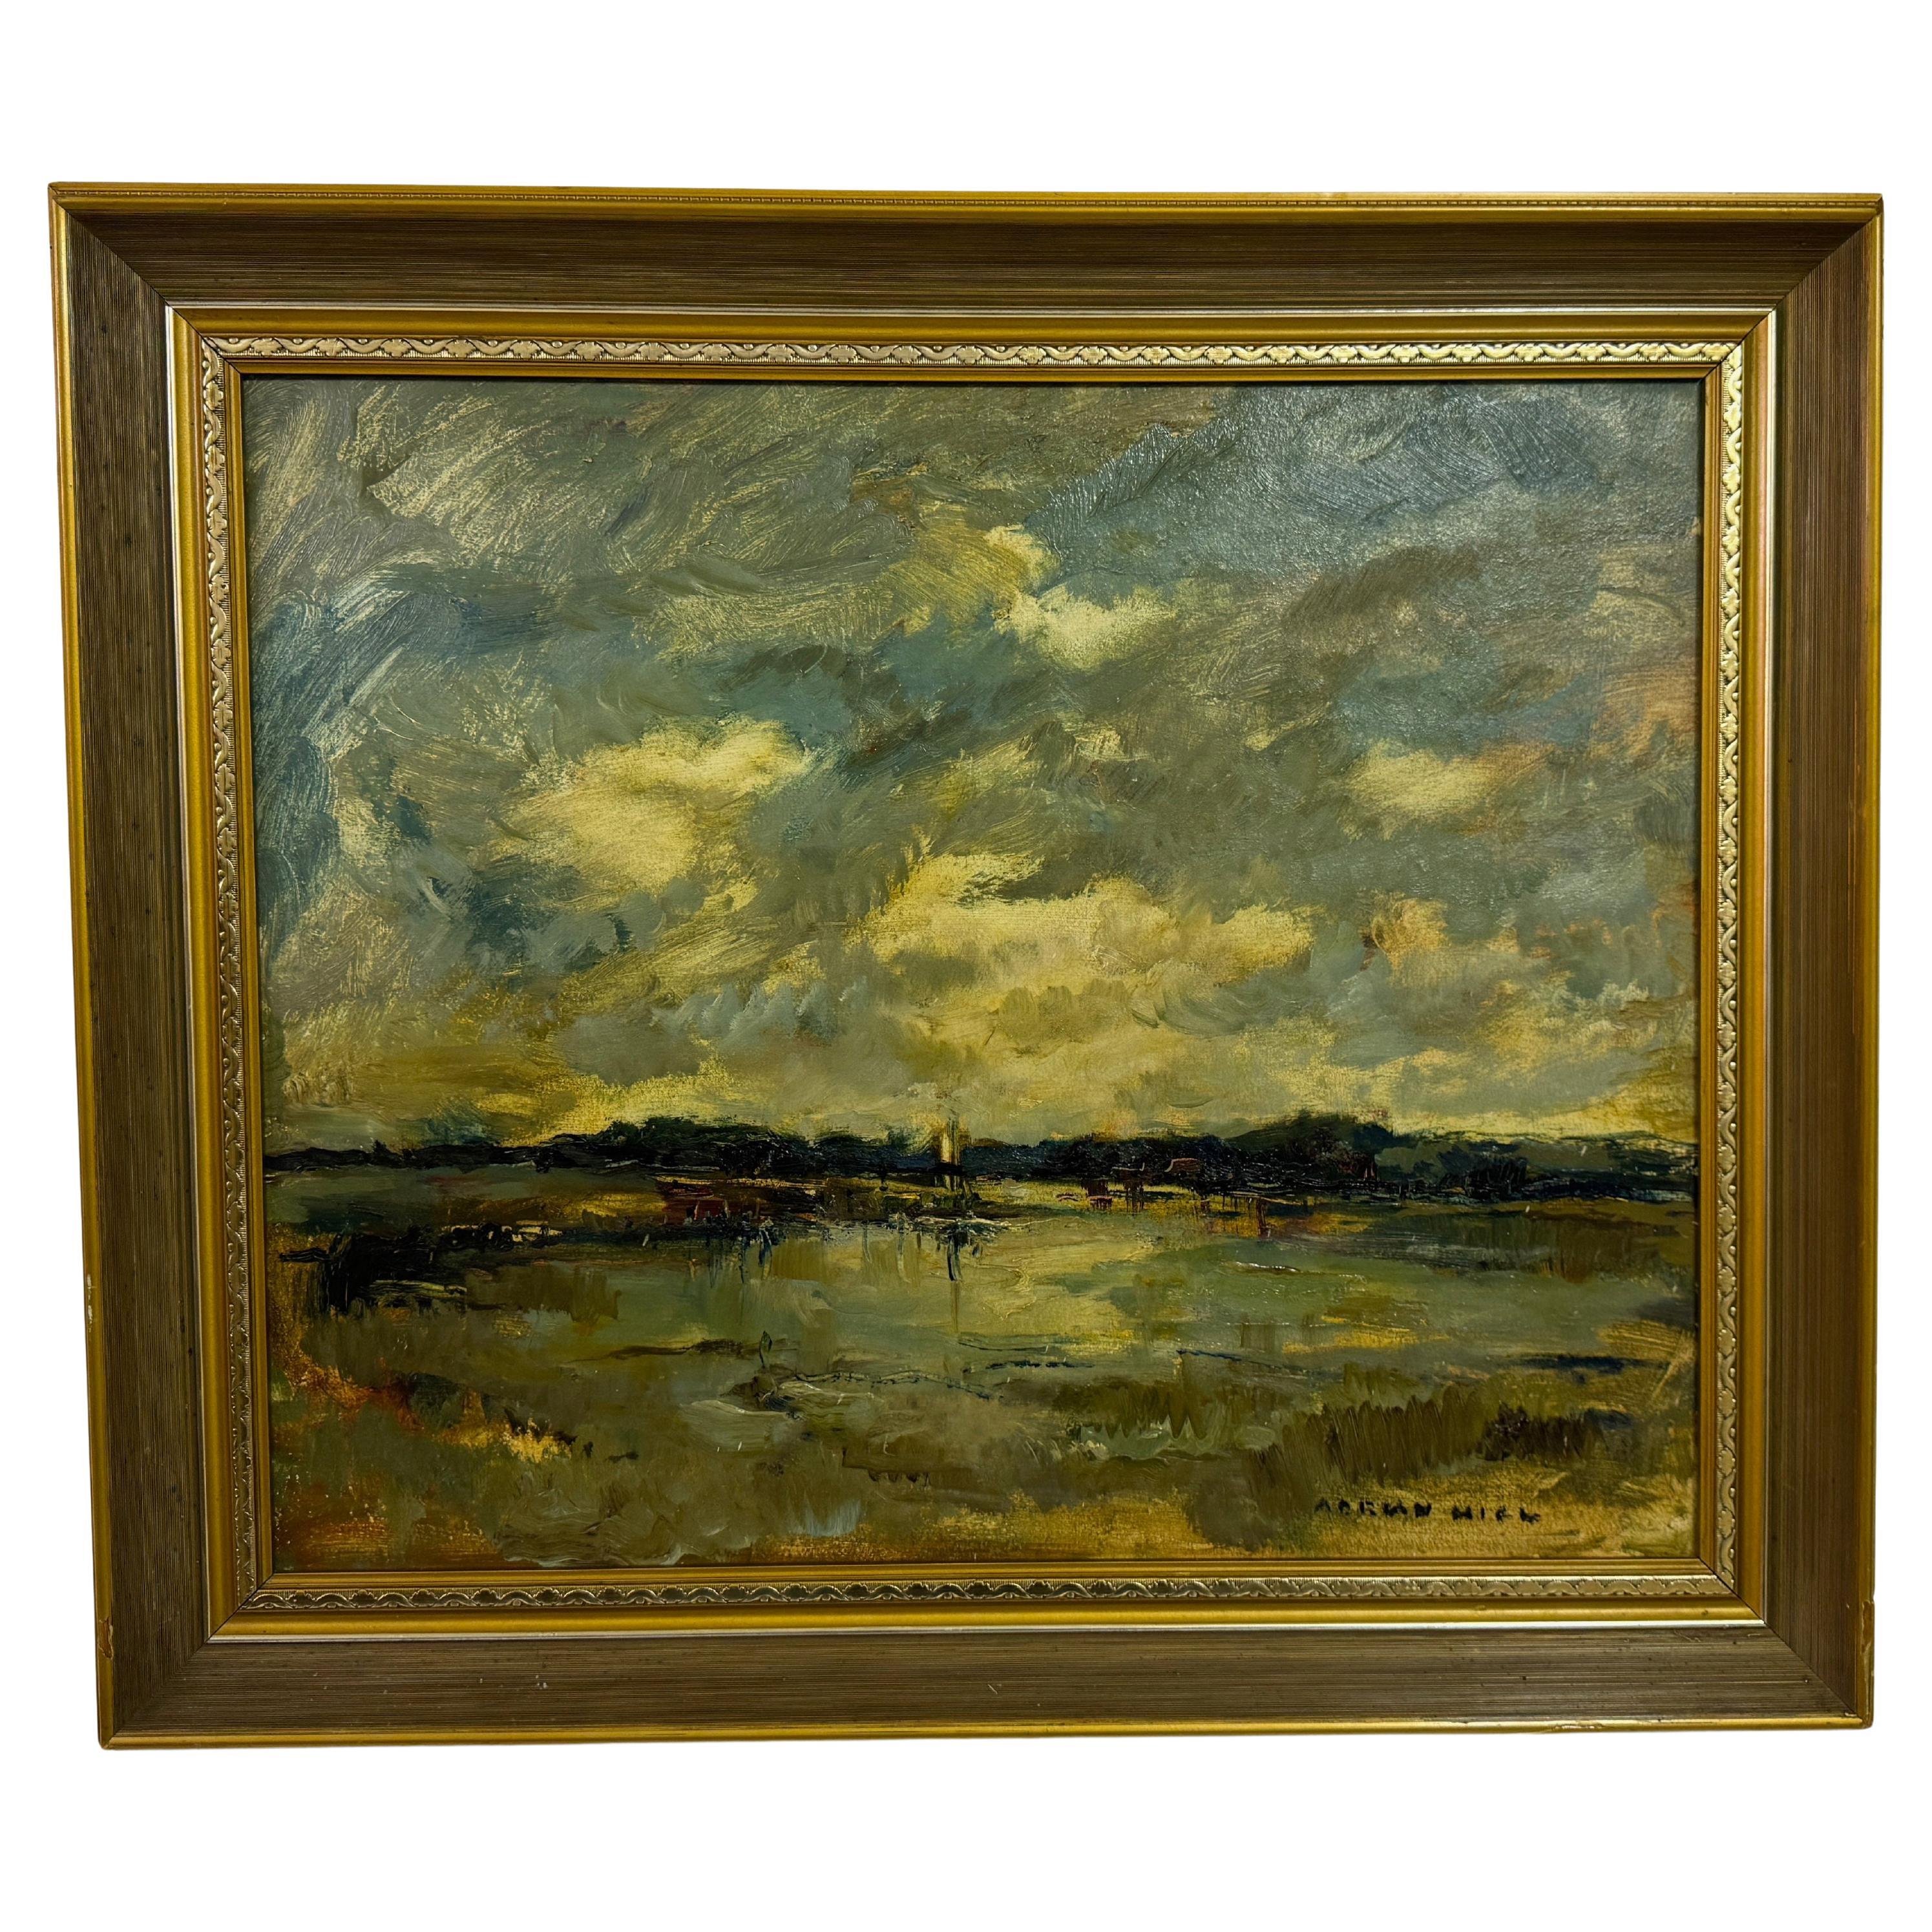 Painting on Canvas by Adrian Hill (1897-1977) For Sale